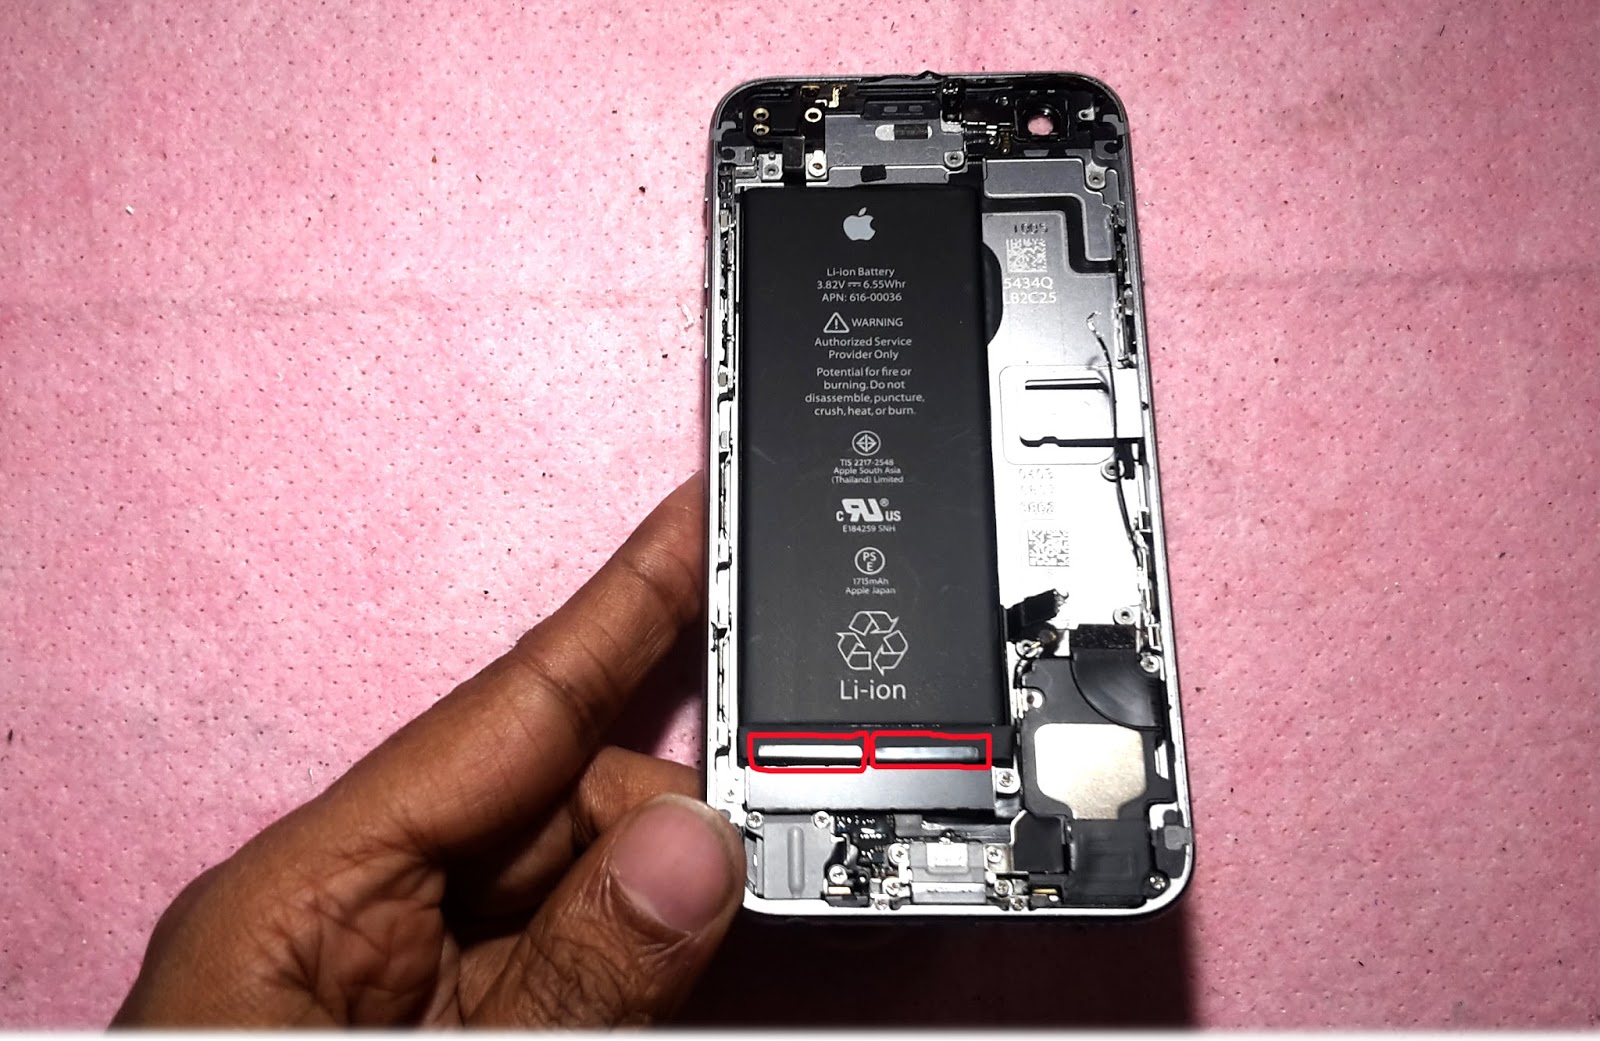 Iphone 6s Battery Replacement. Iphone 6 Battery. Iphone 6s Battery ways. 2500 6s АКБ.